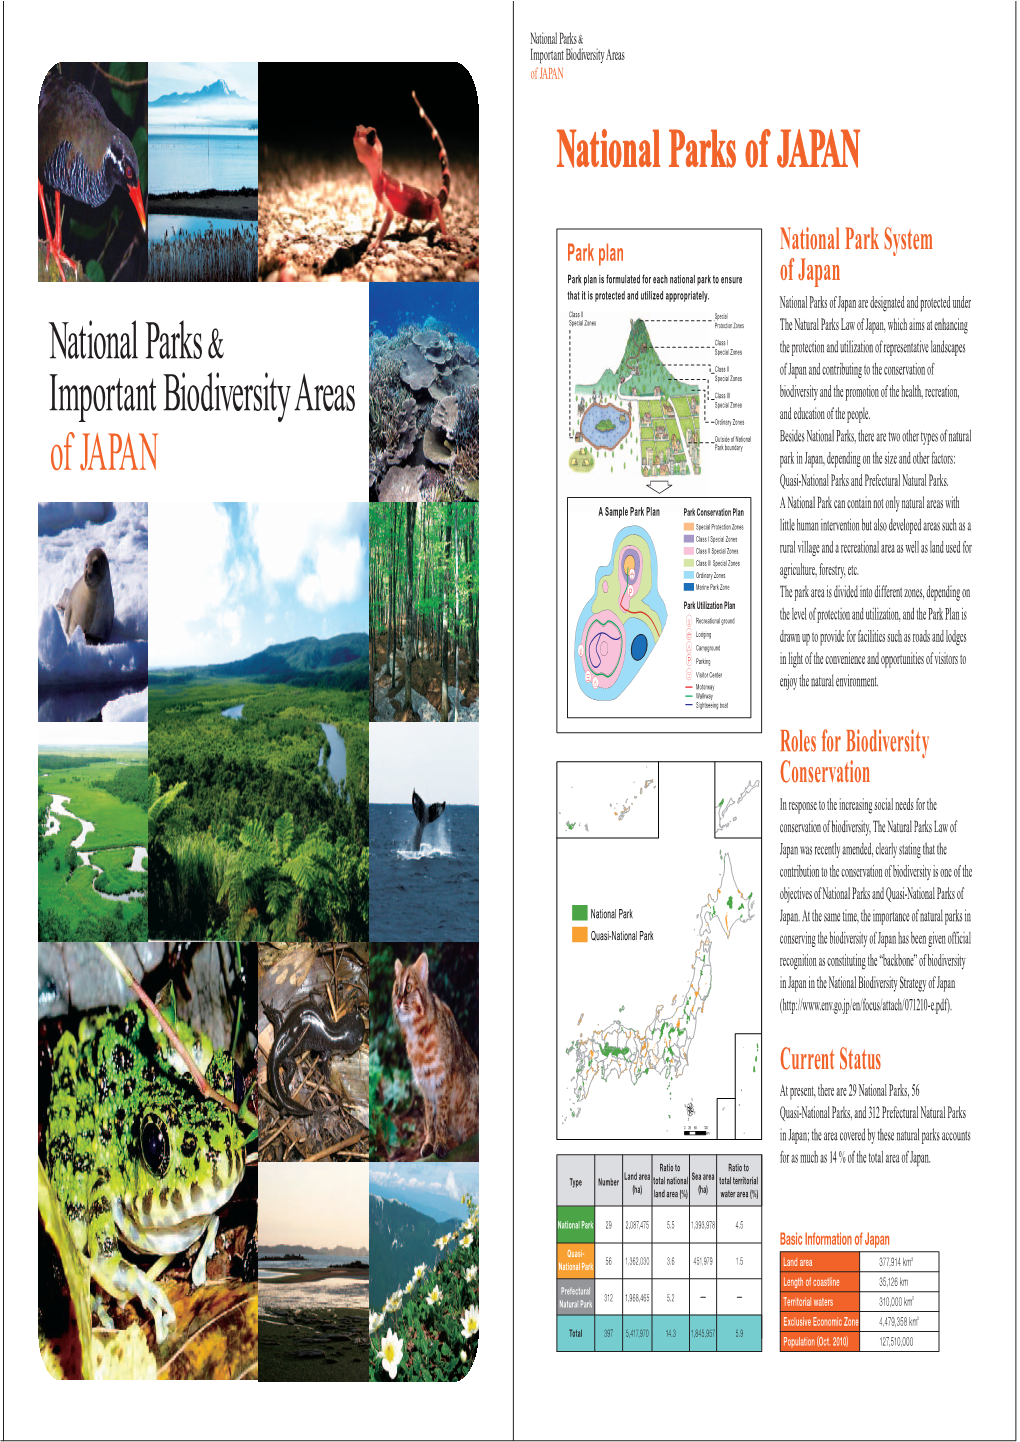 National Parks & Important Biodiversity Areas of JAPAN